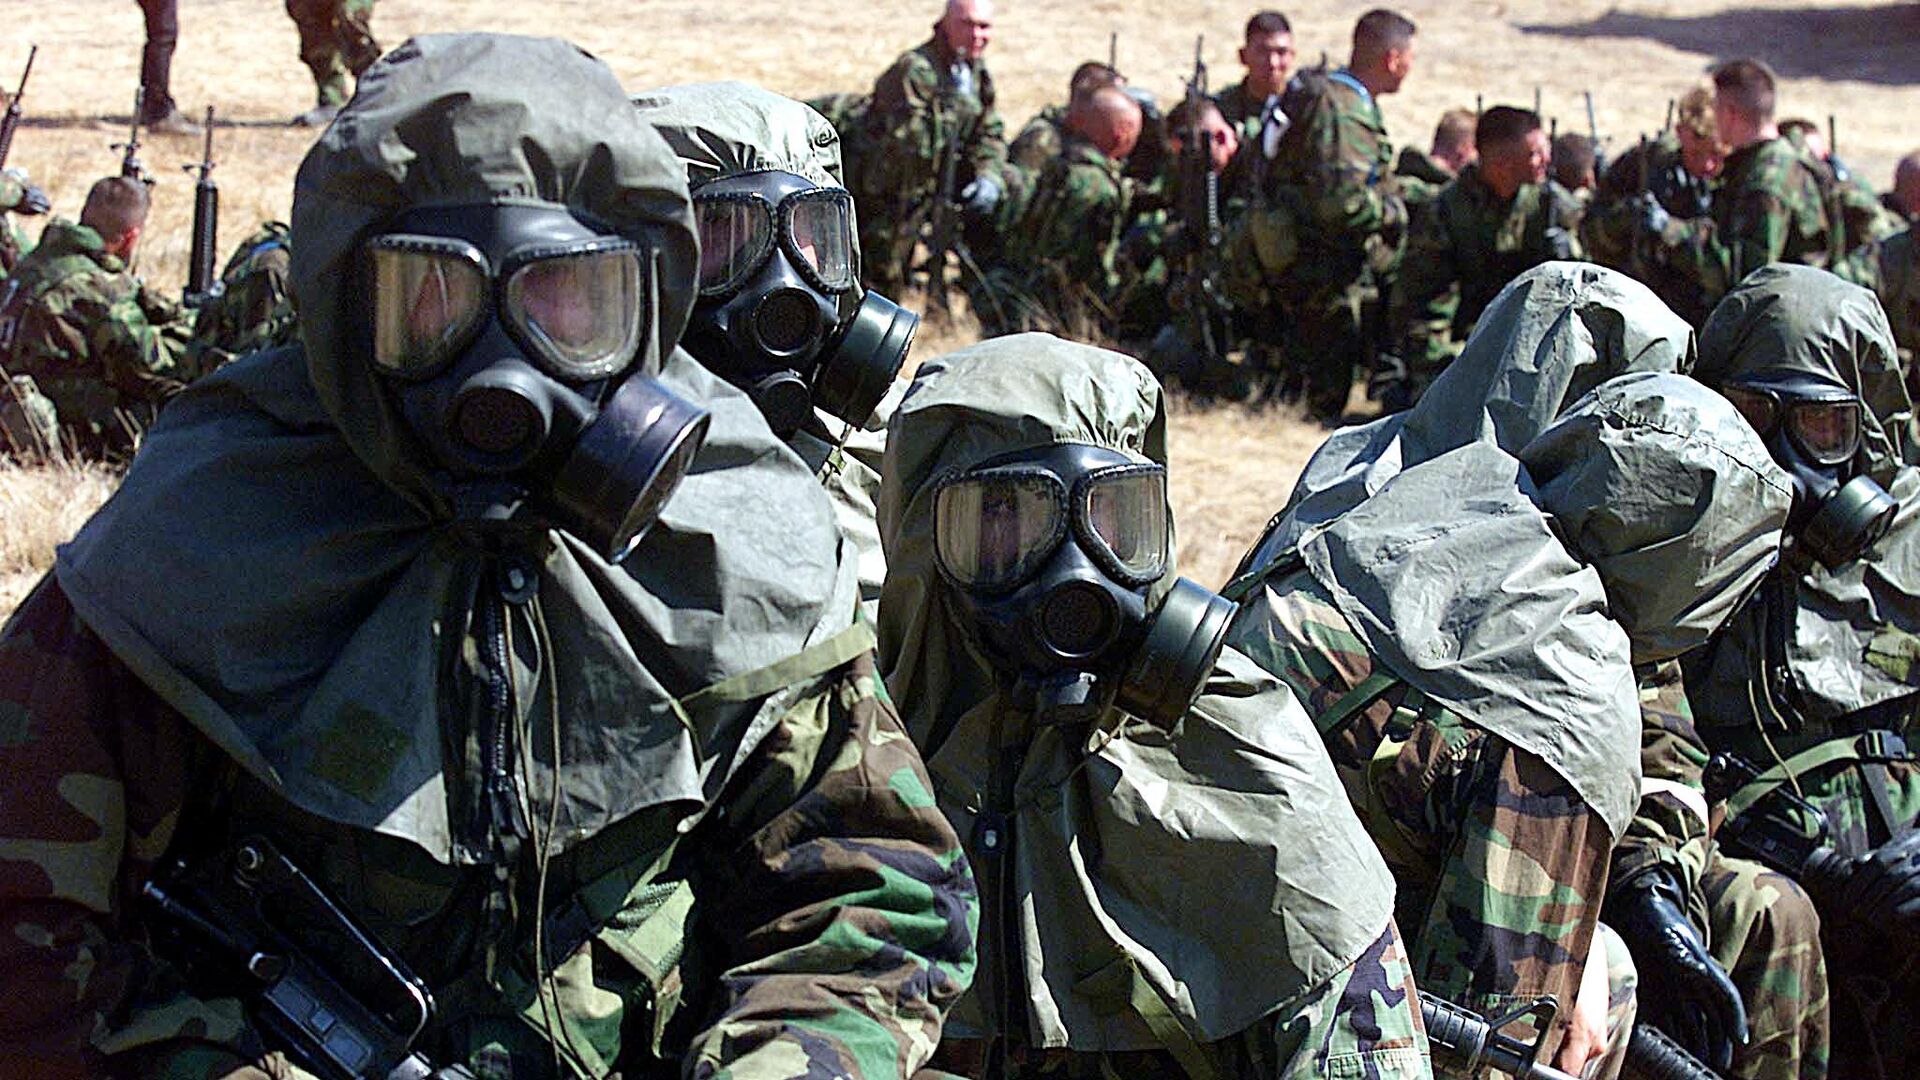 A detachment of US Marines from the 2nd Battalion, 4th Marine Regiment, 1st Marine Division prepare to enter the gas chamber during NBC (Nuclear, Biological and Chemical) warfare training at Camp Pendleton near Oceanside, California, 02 October, 2001.  Marines spent 5 minutes in a gas chamber exposed to CS gas and removed their masked for 10 seconds during the exercise. AFP PHOTO   Mike NELSON (Photo by MIKE NELSON / AFP) - Sputnik International, 1920, 19.09.2022